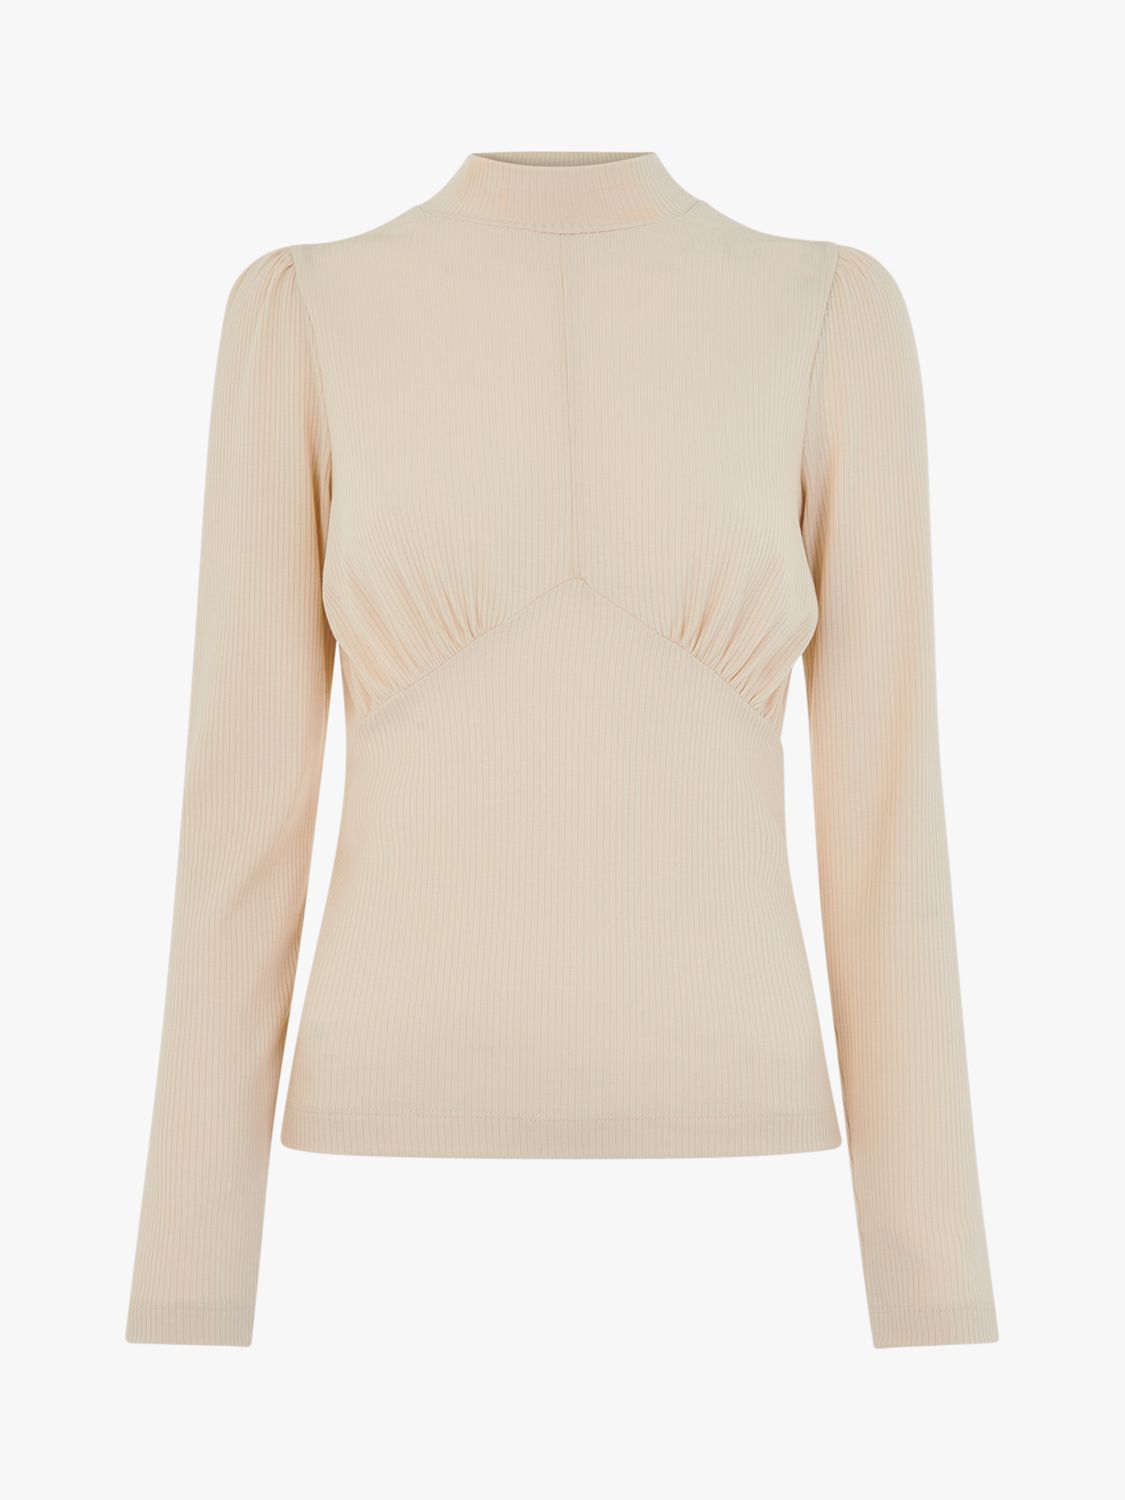 Buy Whistles Gathered Empire Line Top Online at johnlewis.com